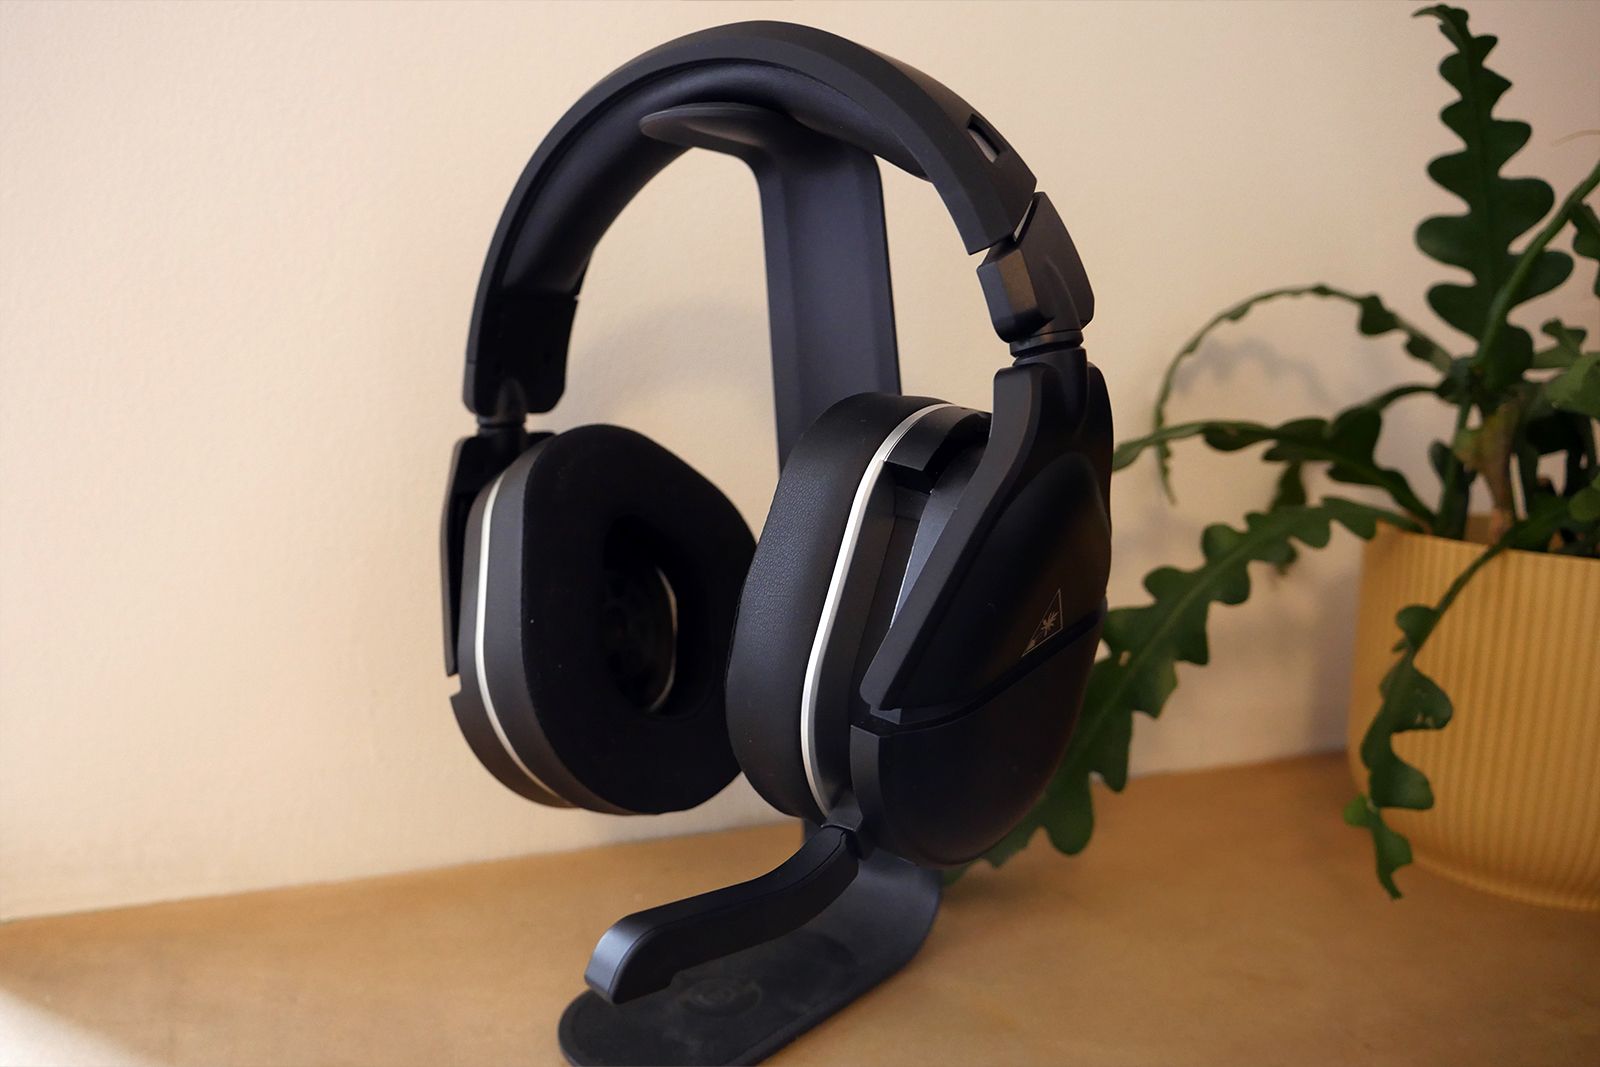 Turtle Beach Stealth 700 Gen 2 MAX review: Easy to recommend